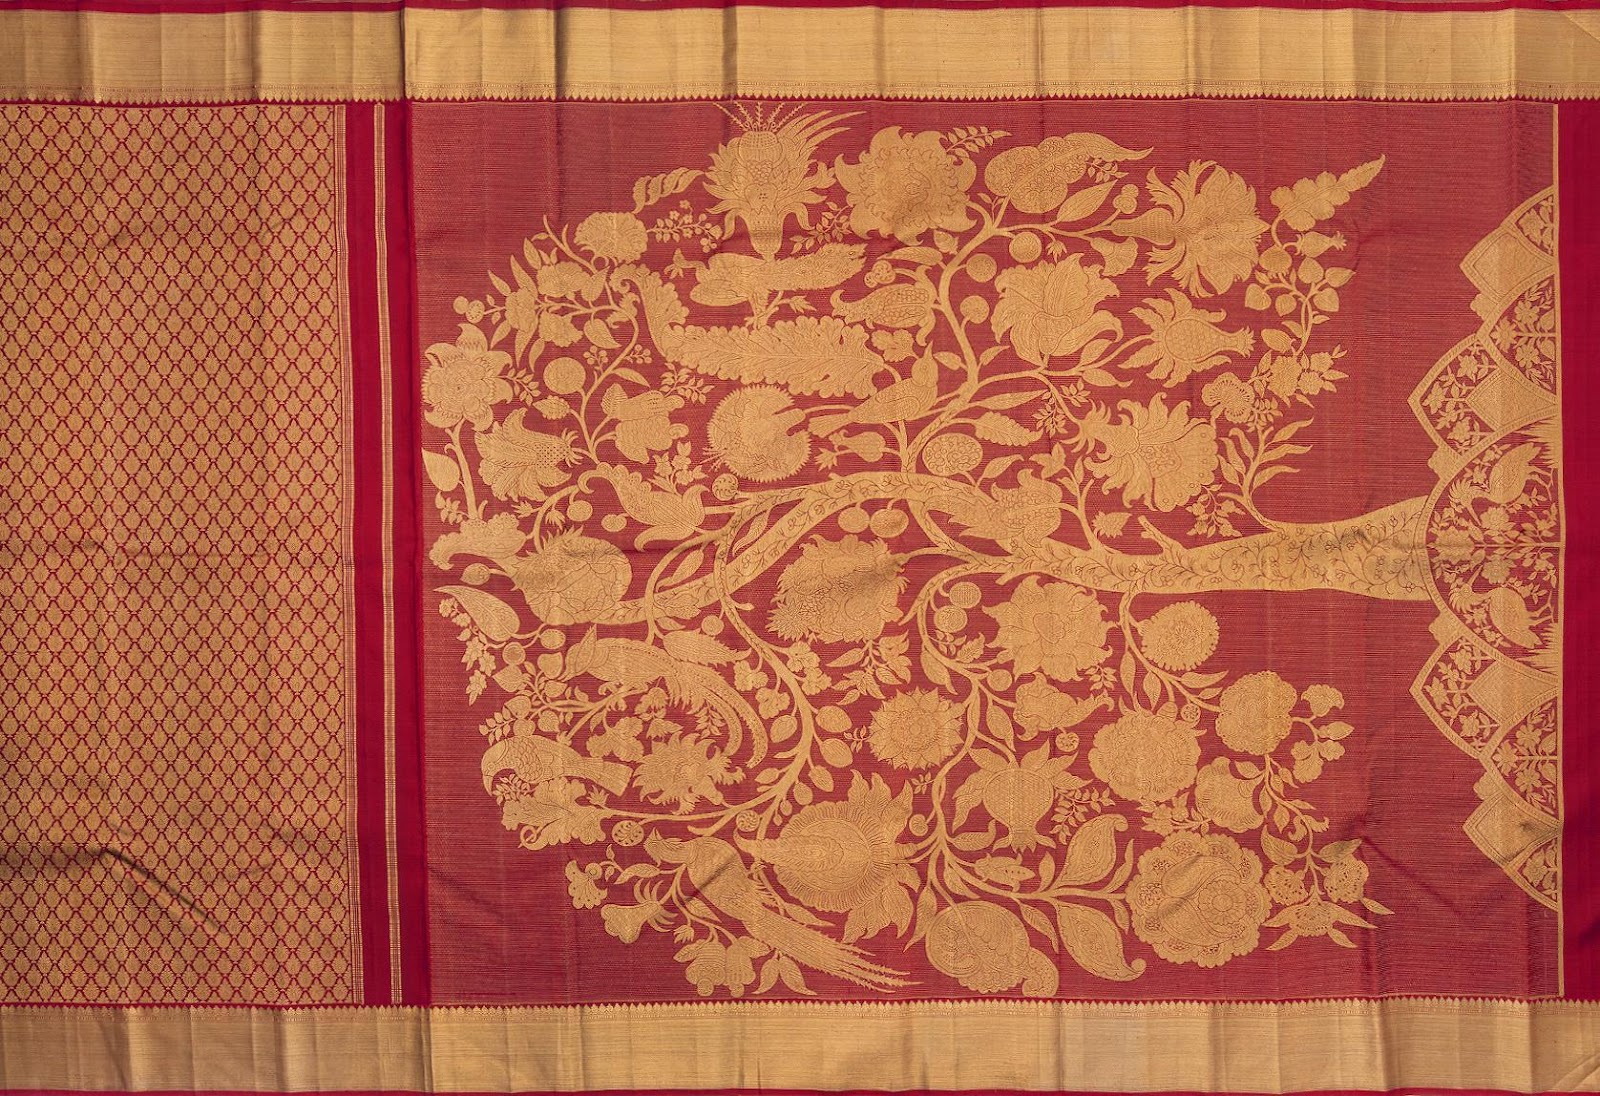 The ‘Tree of Life’ handloom Kanchipuram silk saree is a signature RmKV creation and one of our most iconic designs.  